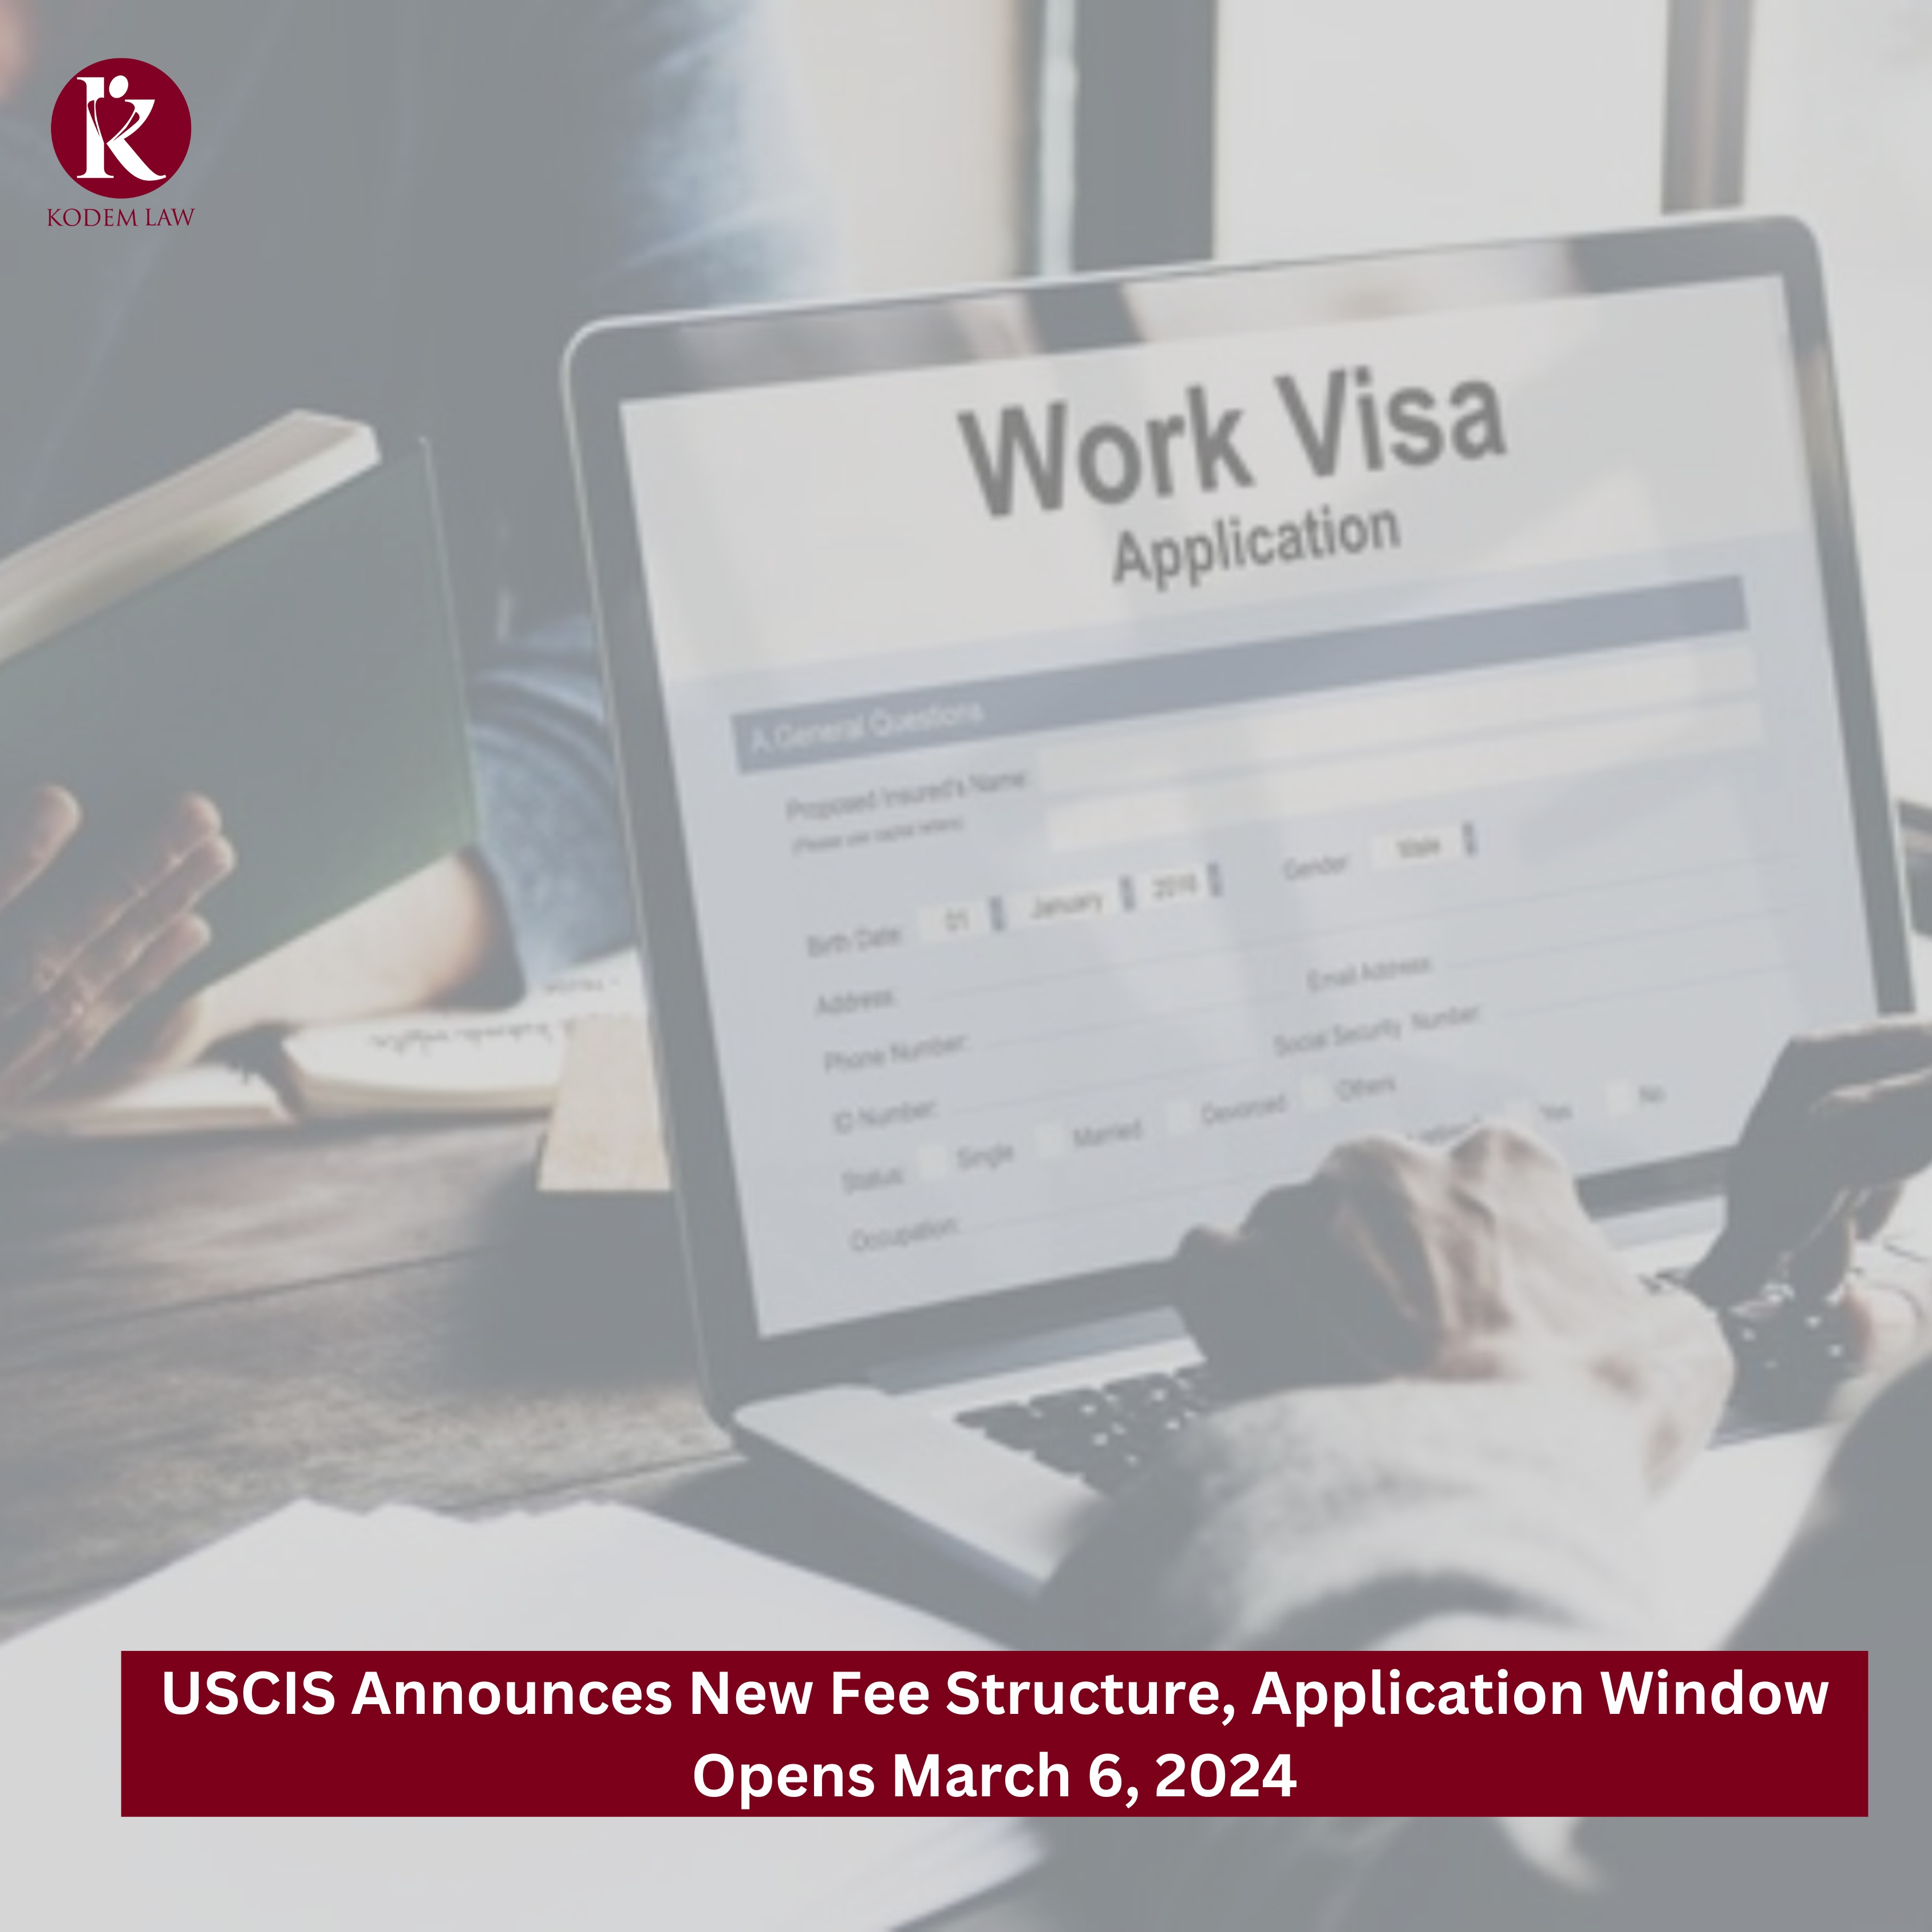 USCIS Announces New Fee Structure, Application Window Opens March 6, 2024